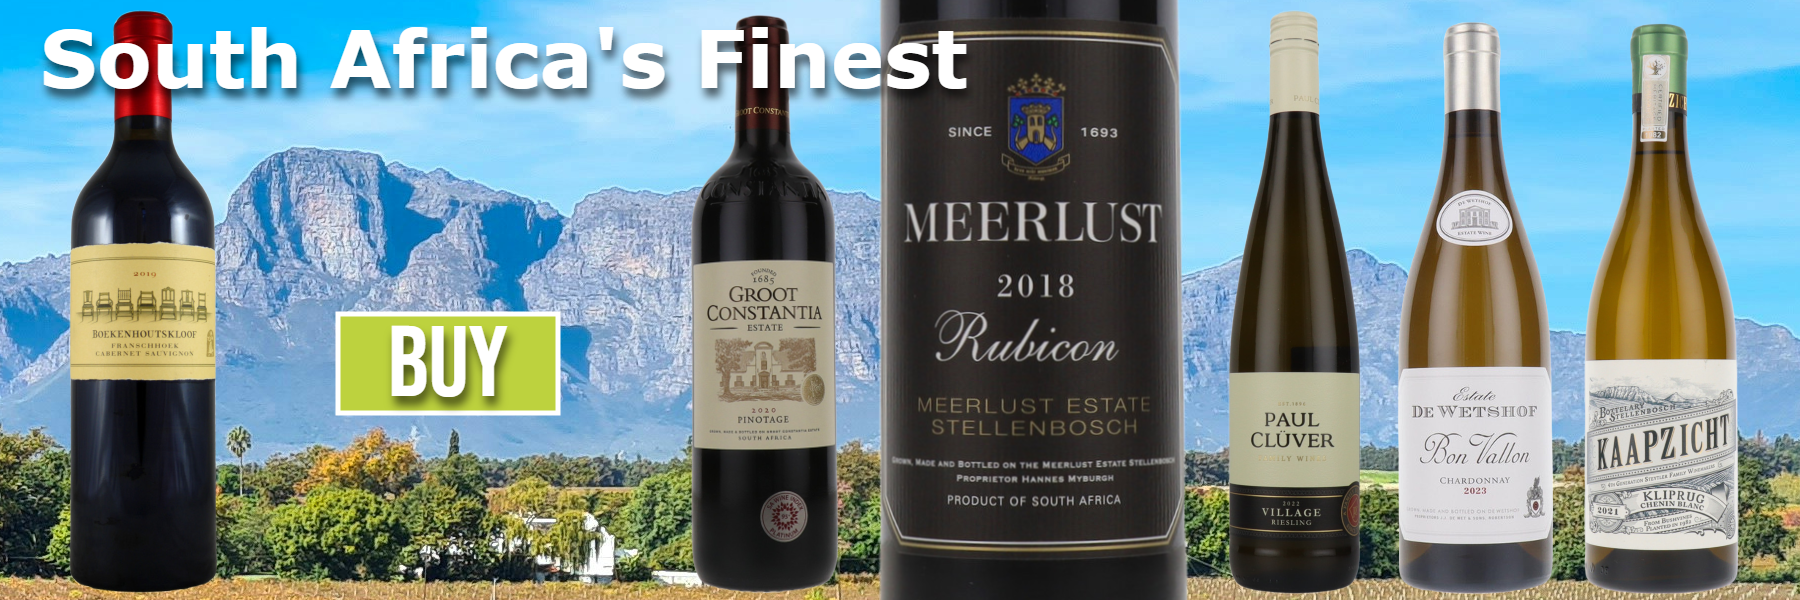 Look out for some of the best producers of exciting South African Cabernet blends, Pinotage, Riesling, Chardonnay and Chenin Blanc 